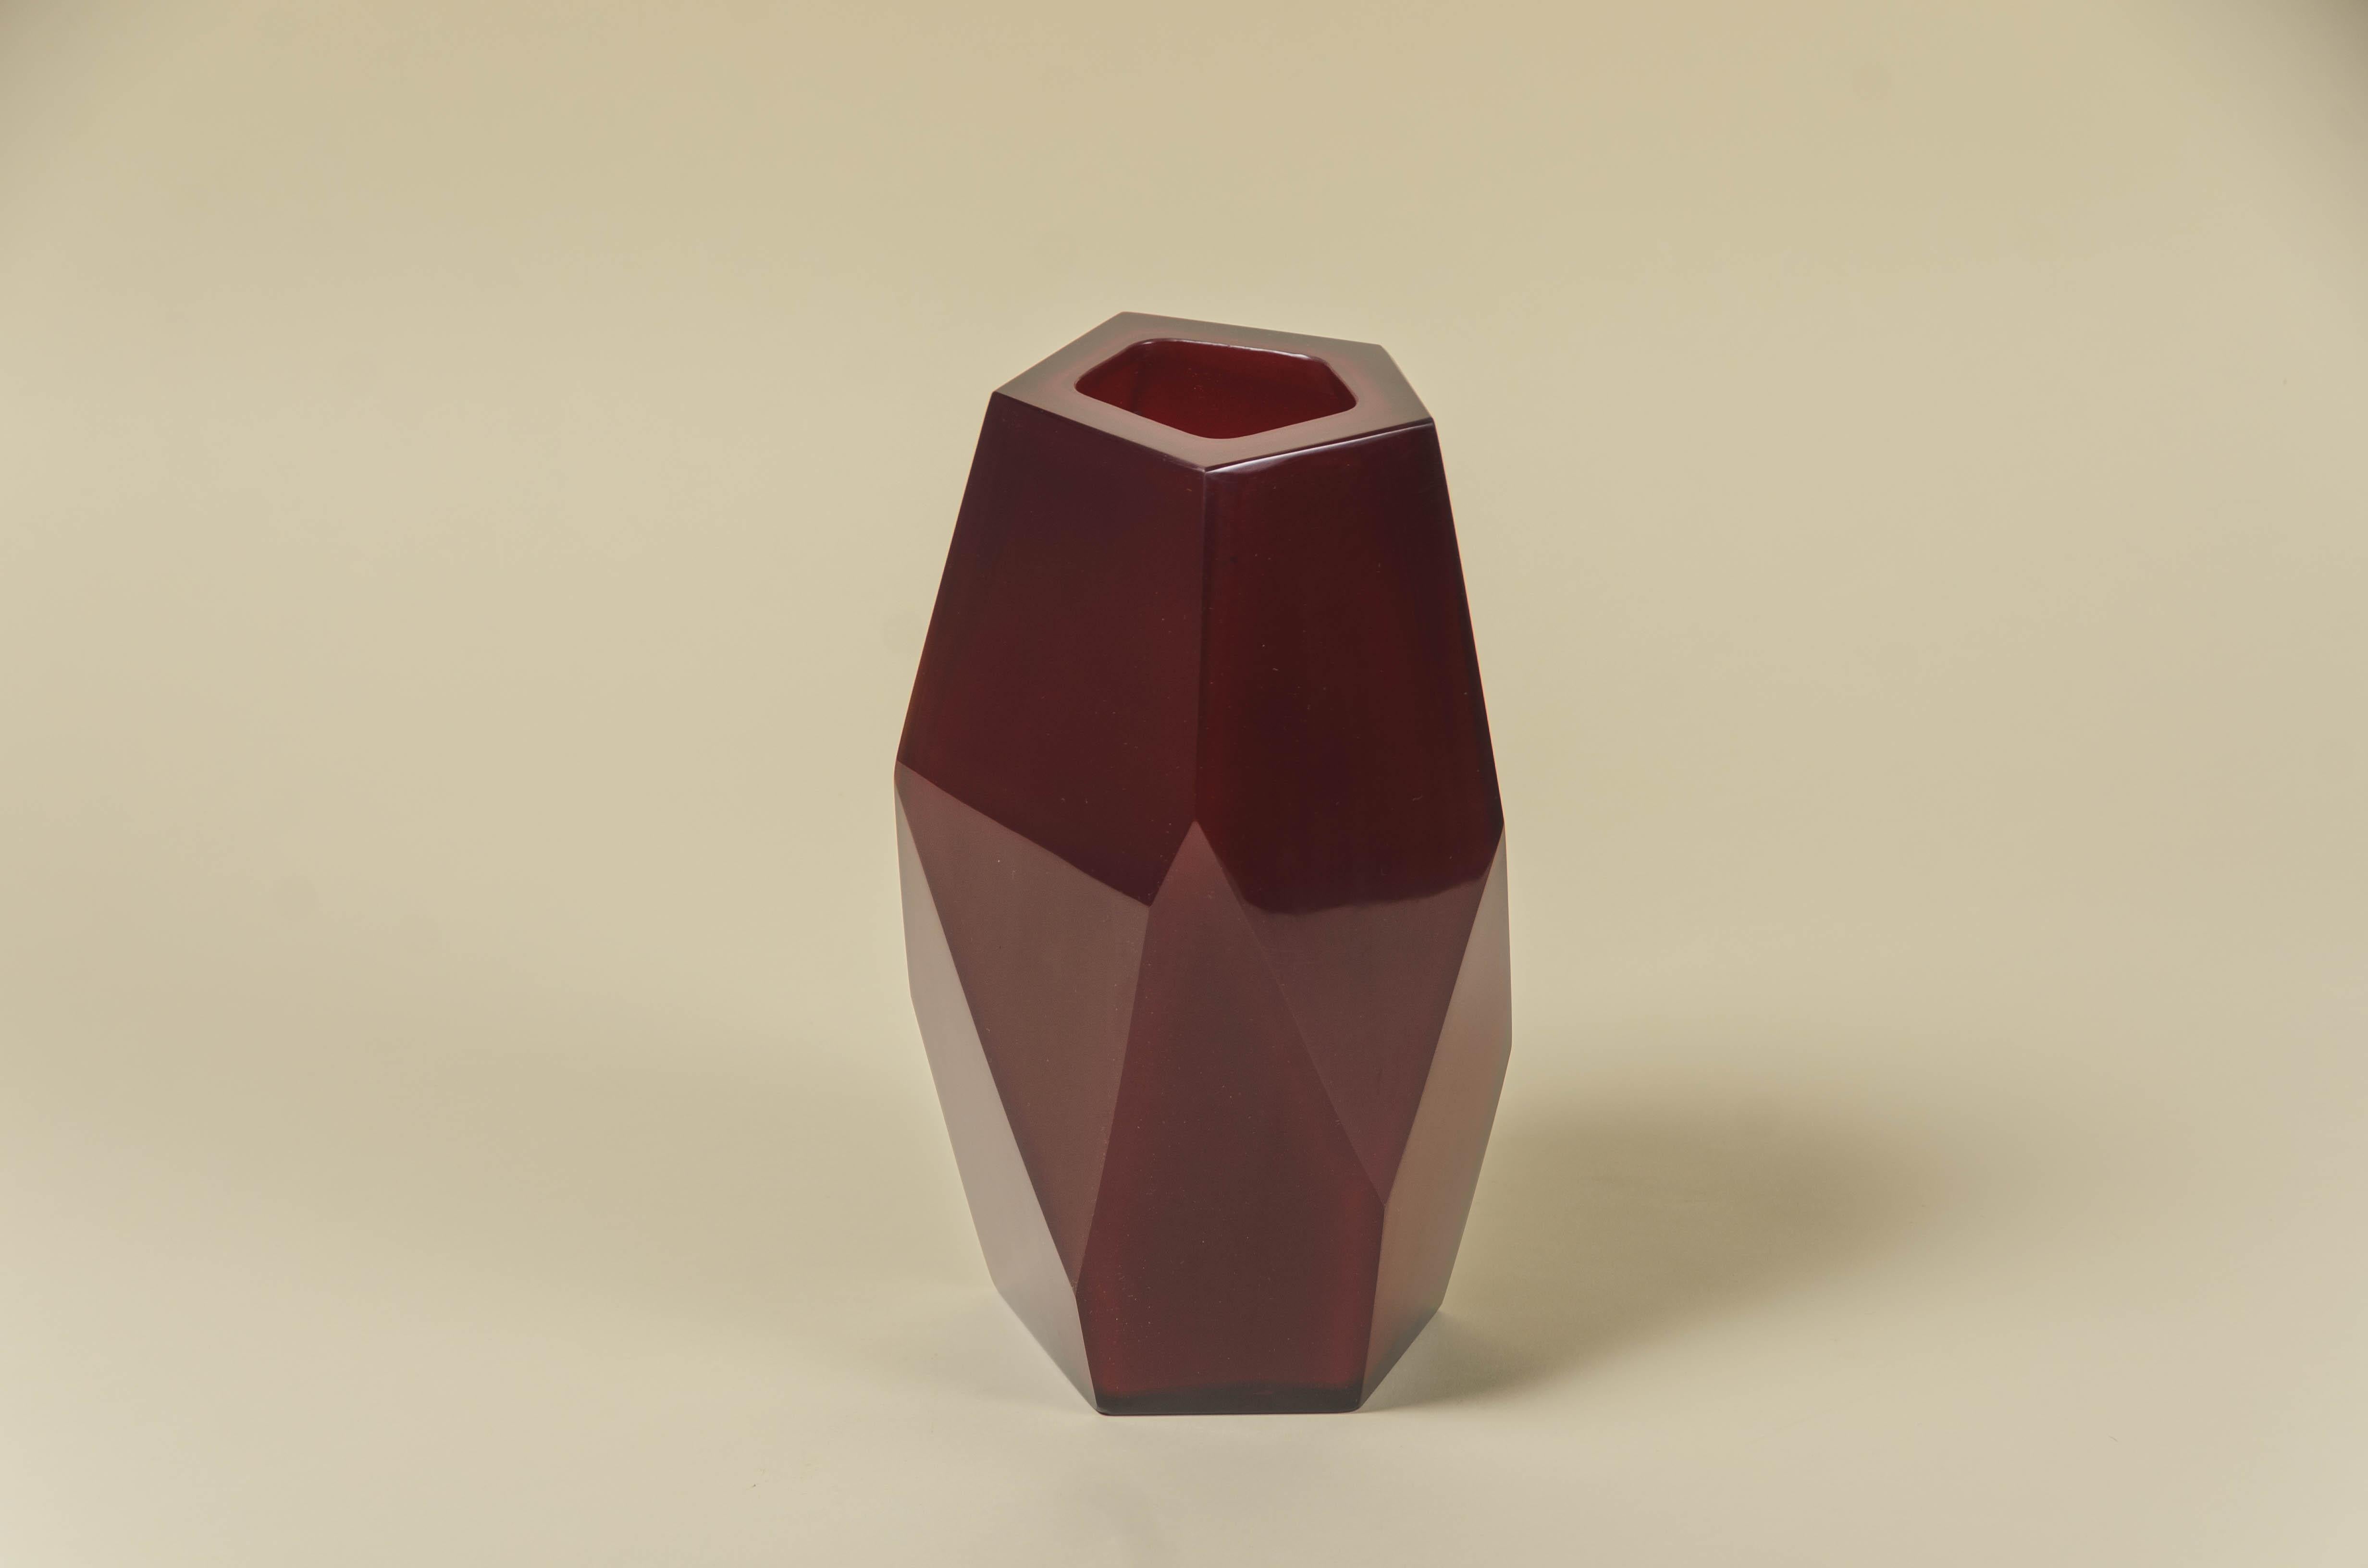 Grand Facet Vase
Raspberry Peking Glass
Hand Blown
Hand Carved
Contemporary 
Limited Edition

Peking glass refers to the high-quality glass art produced by the imperial and 
commercial workshops in Beijing during the Ching Dynasty, China